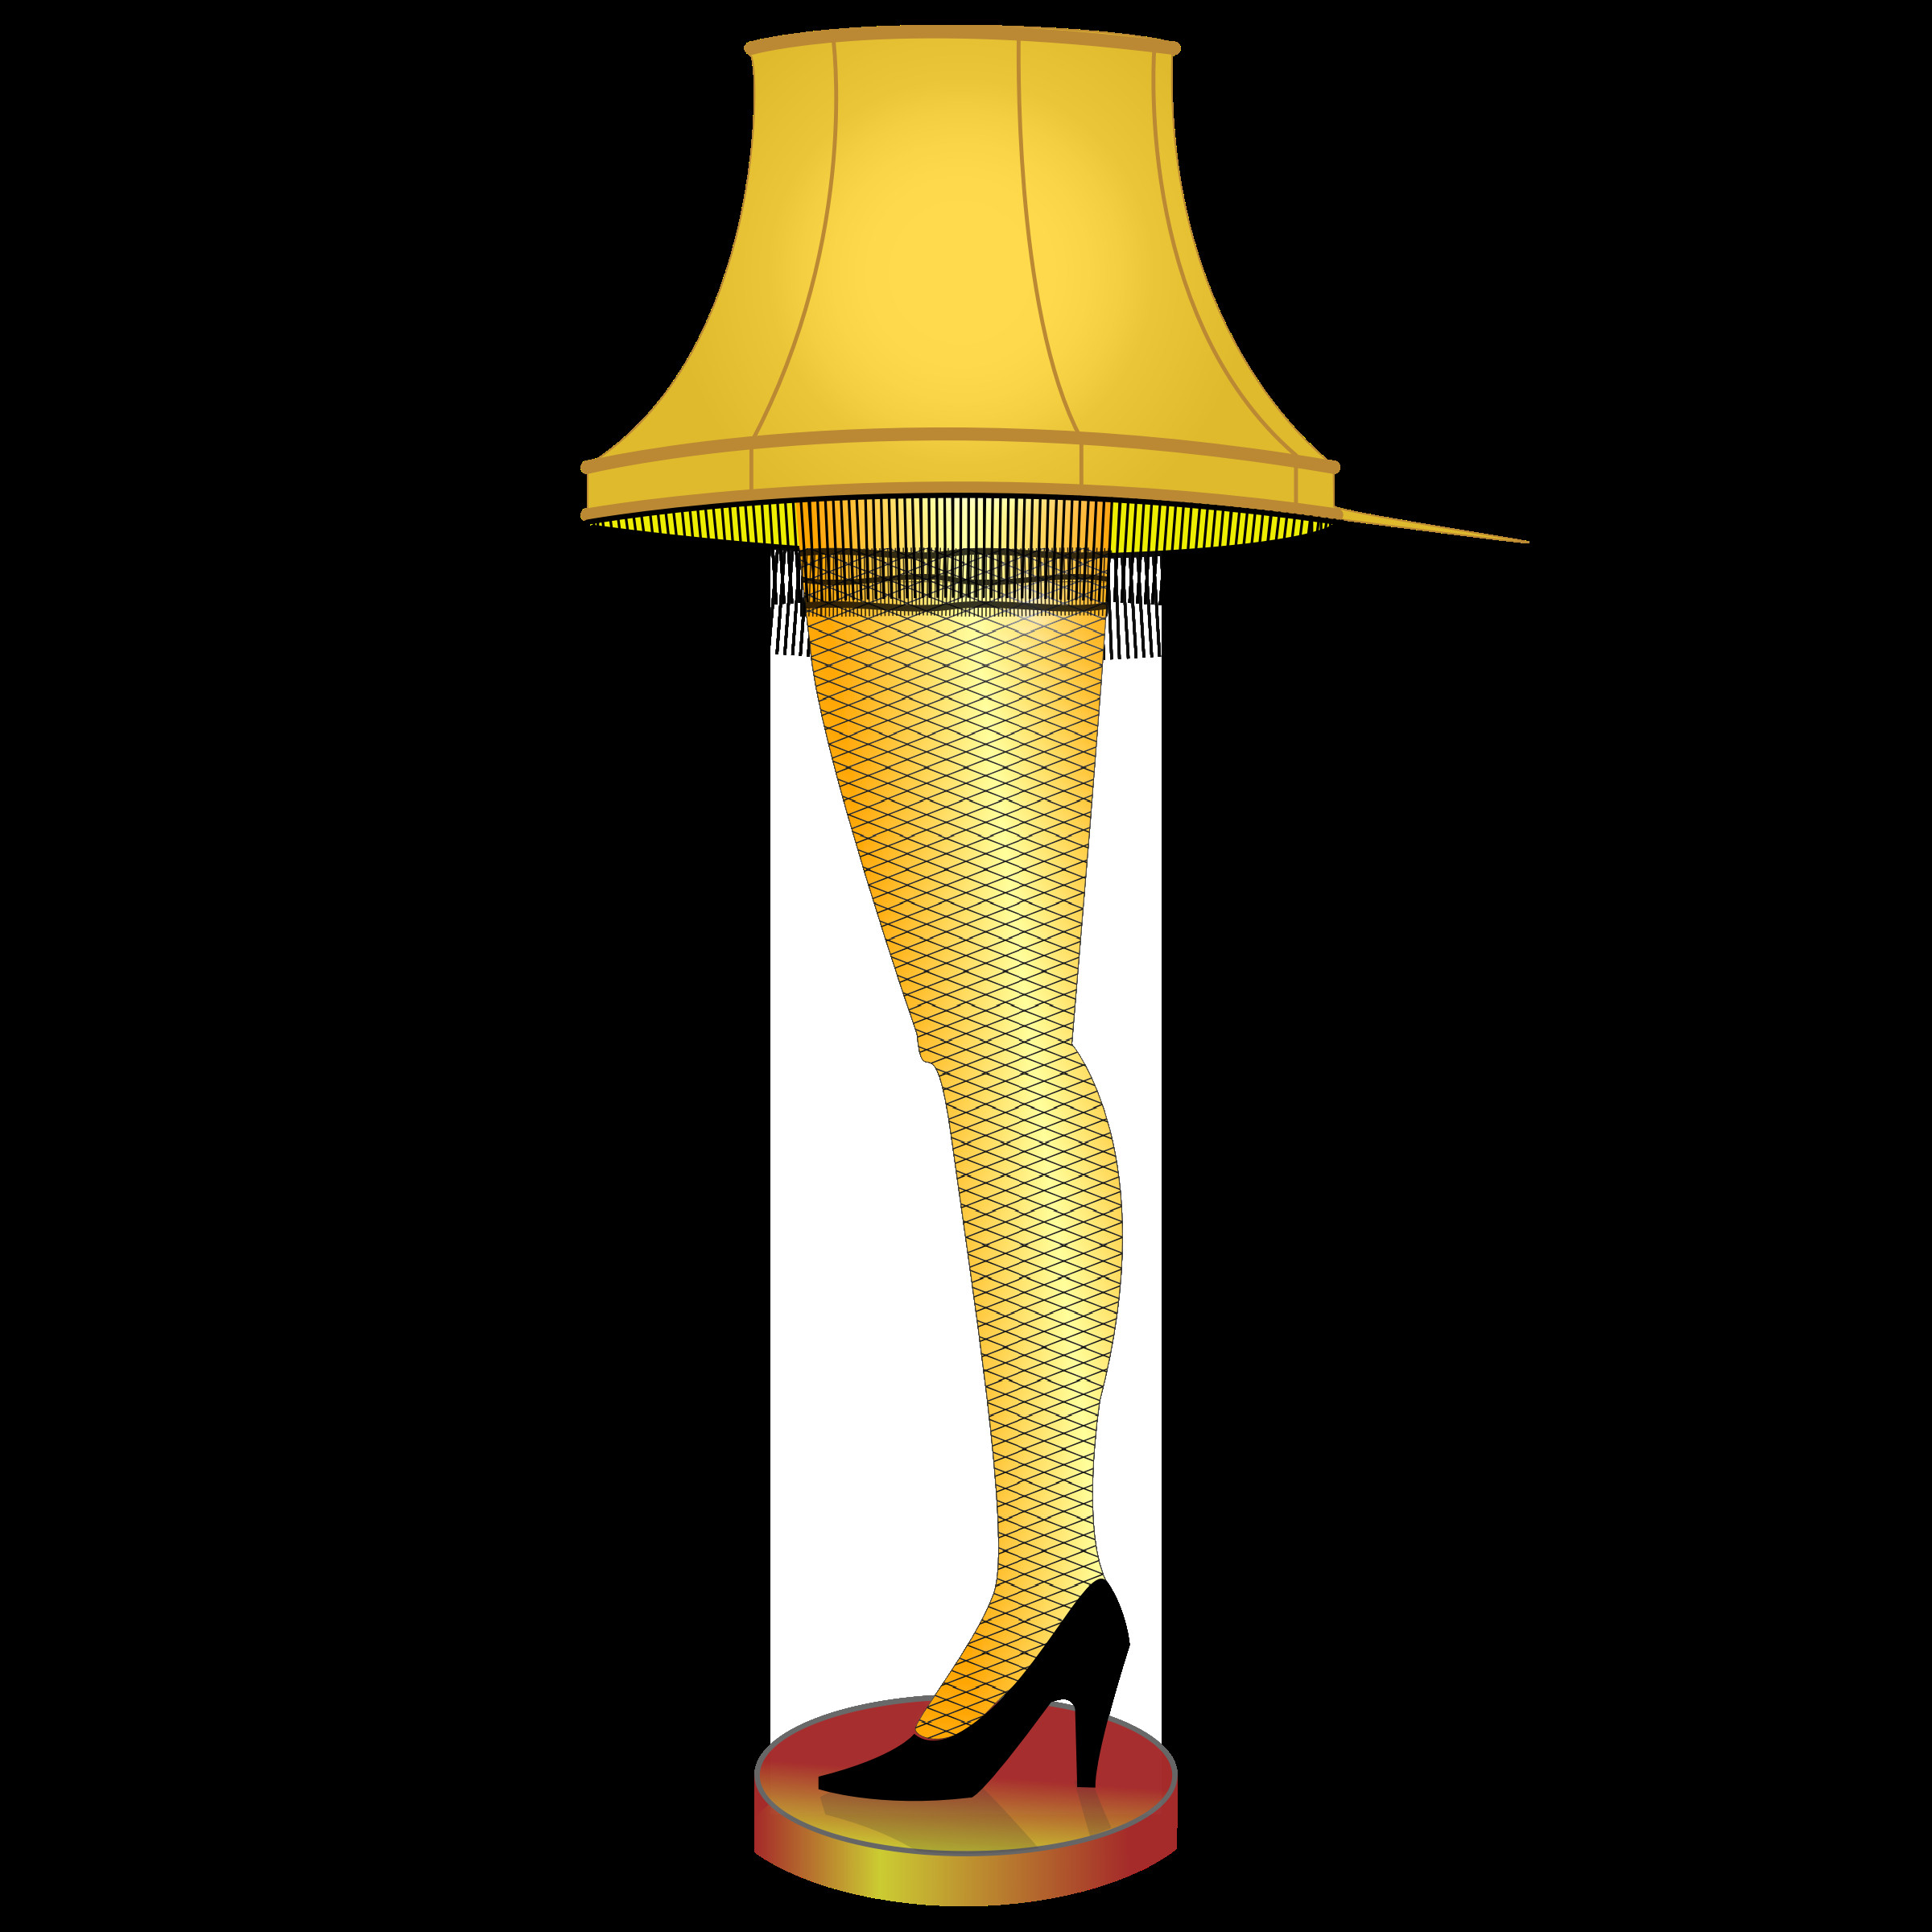 Christmas Leg Lamp Full Size
 Leg in a plaster cast clipart cliparts for you image